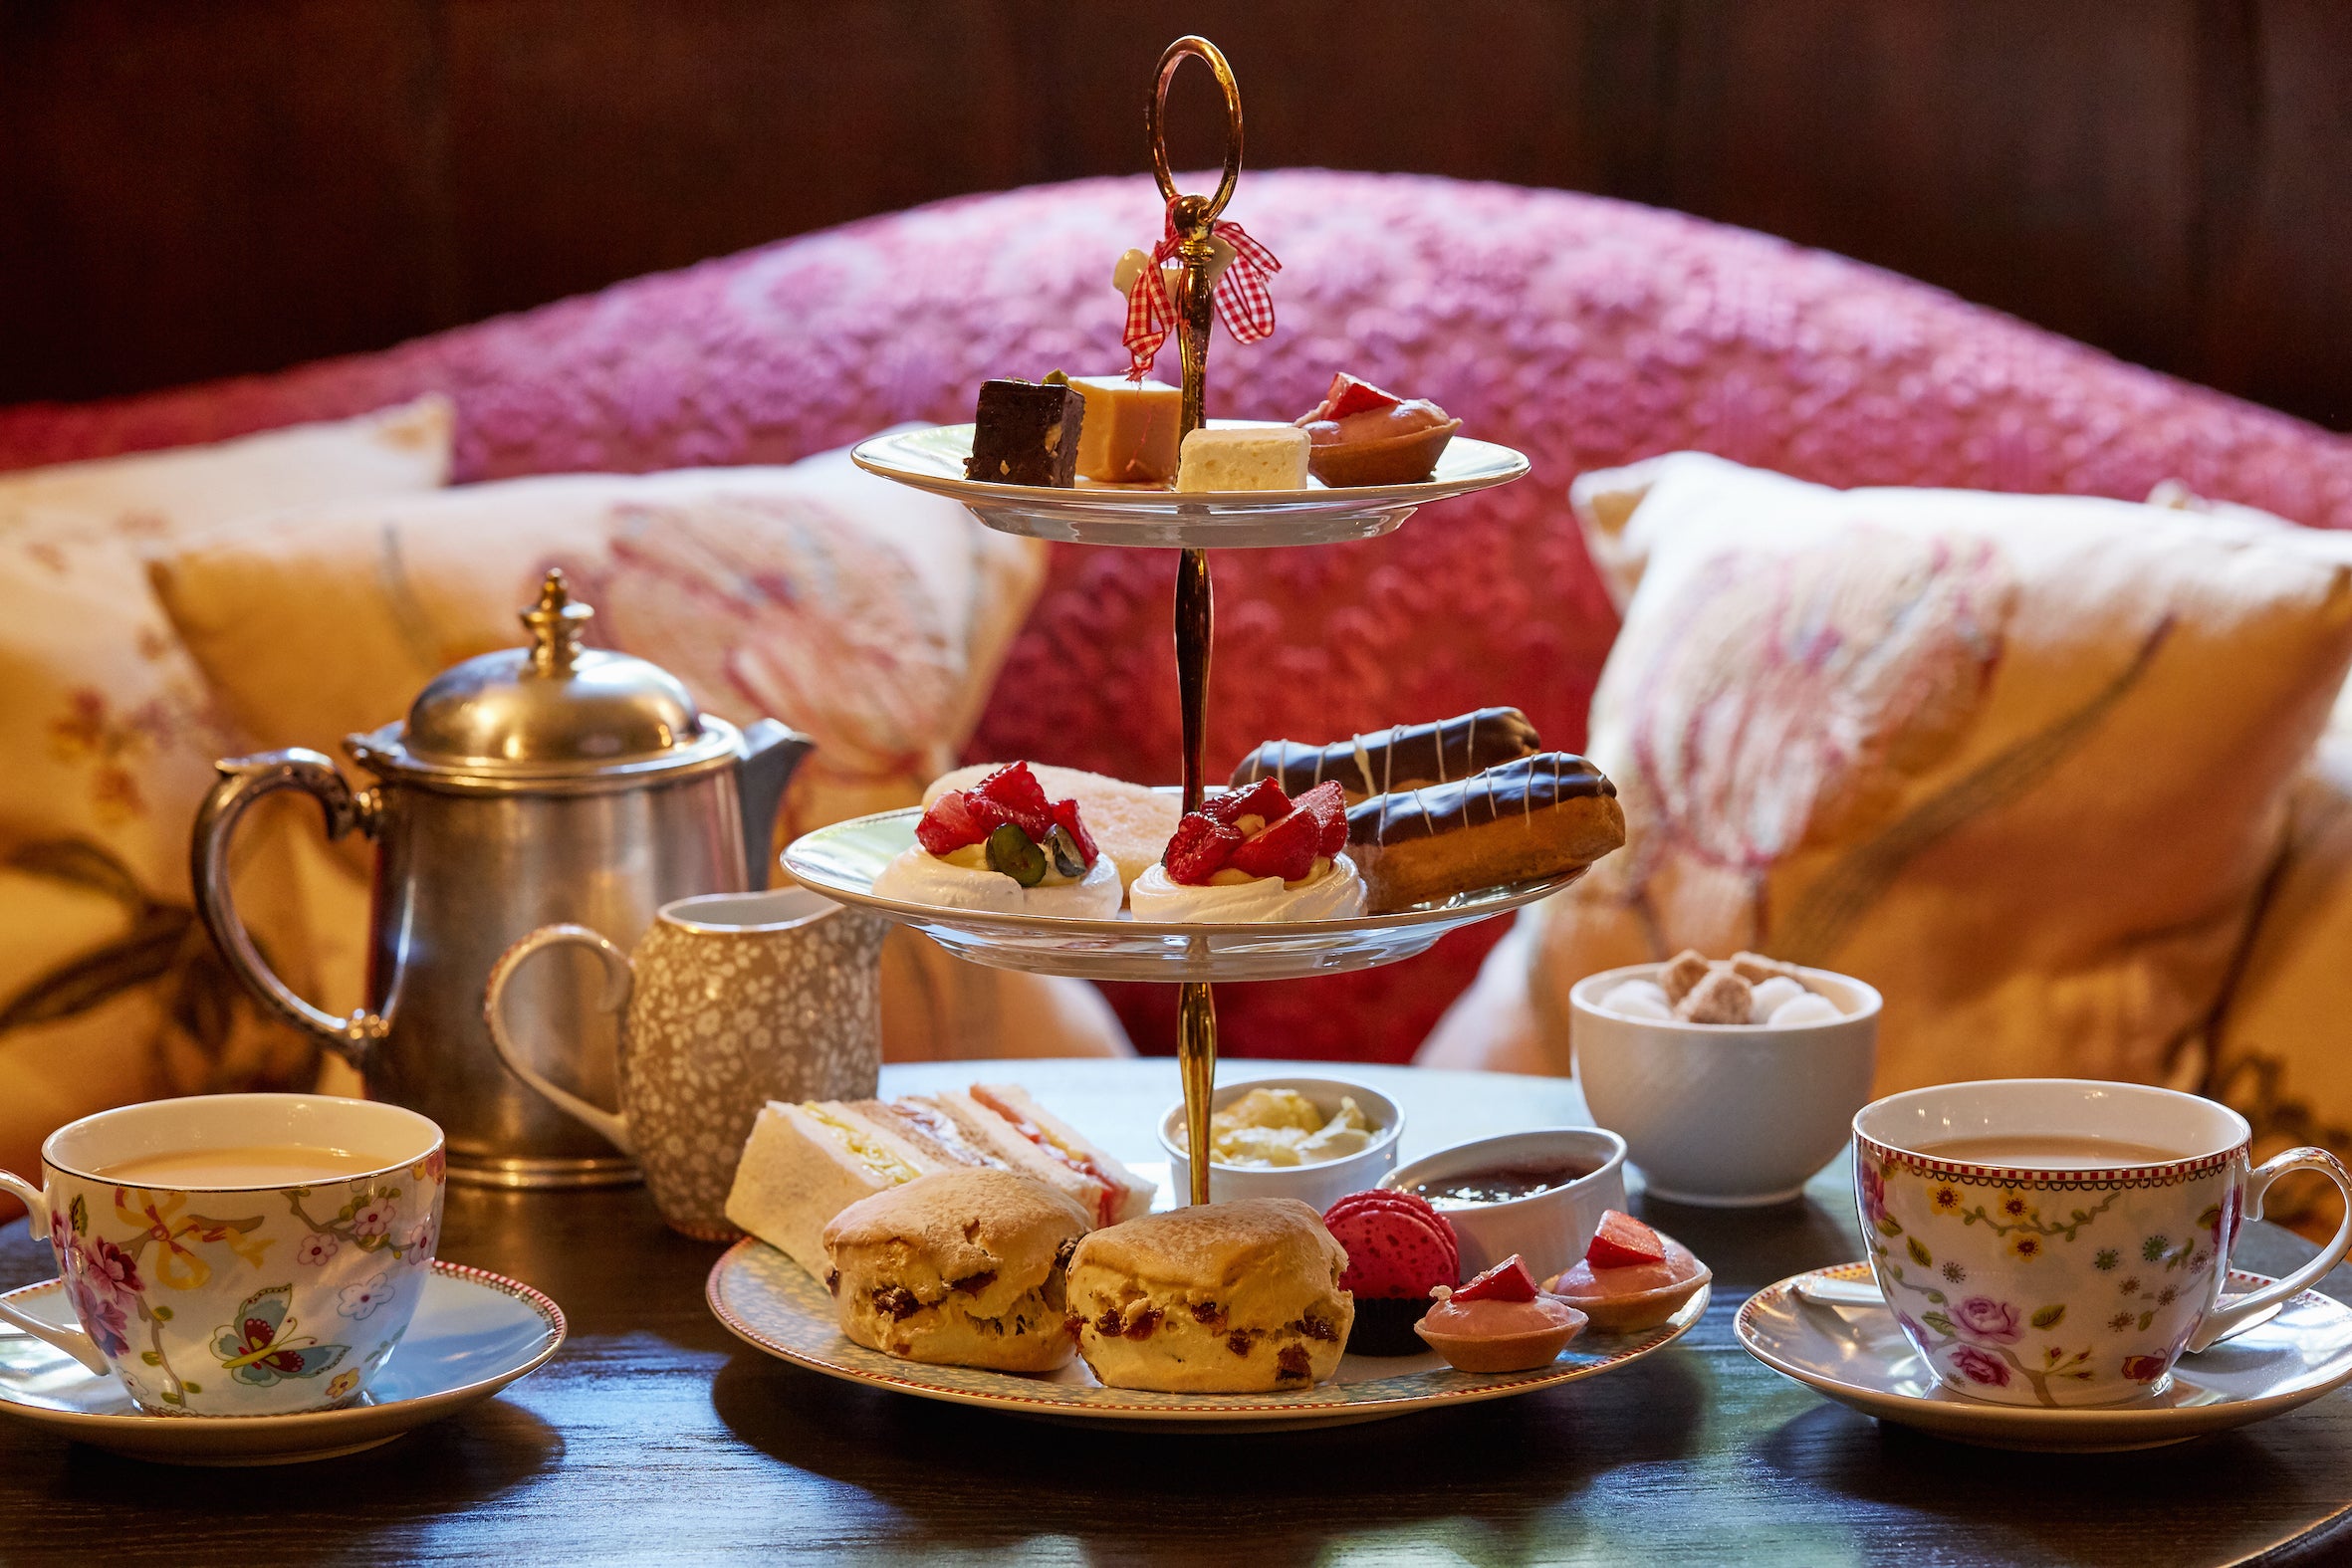 Treat yourself to an afternoon tea at Ockenden Manor